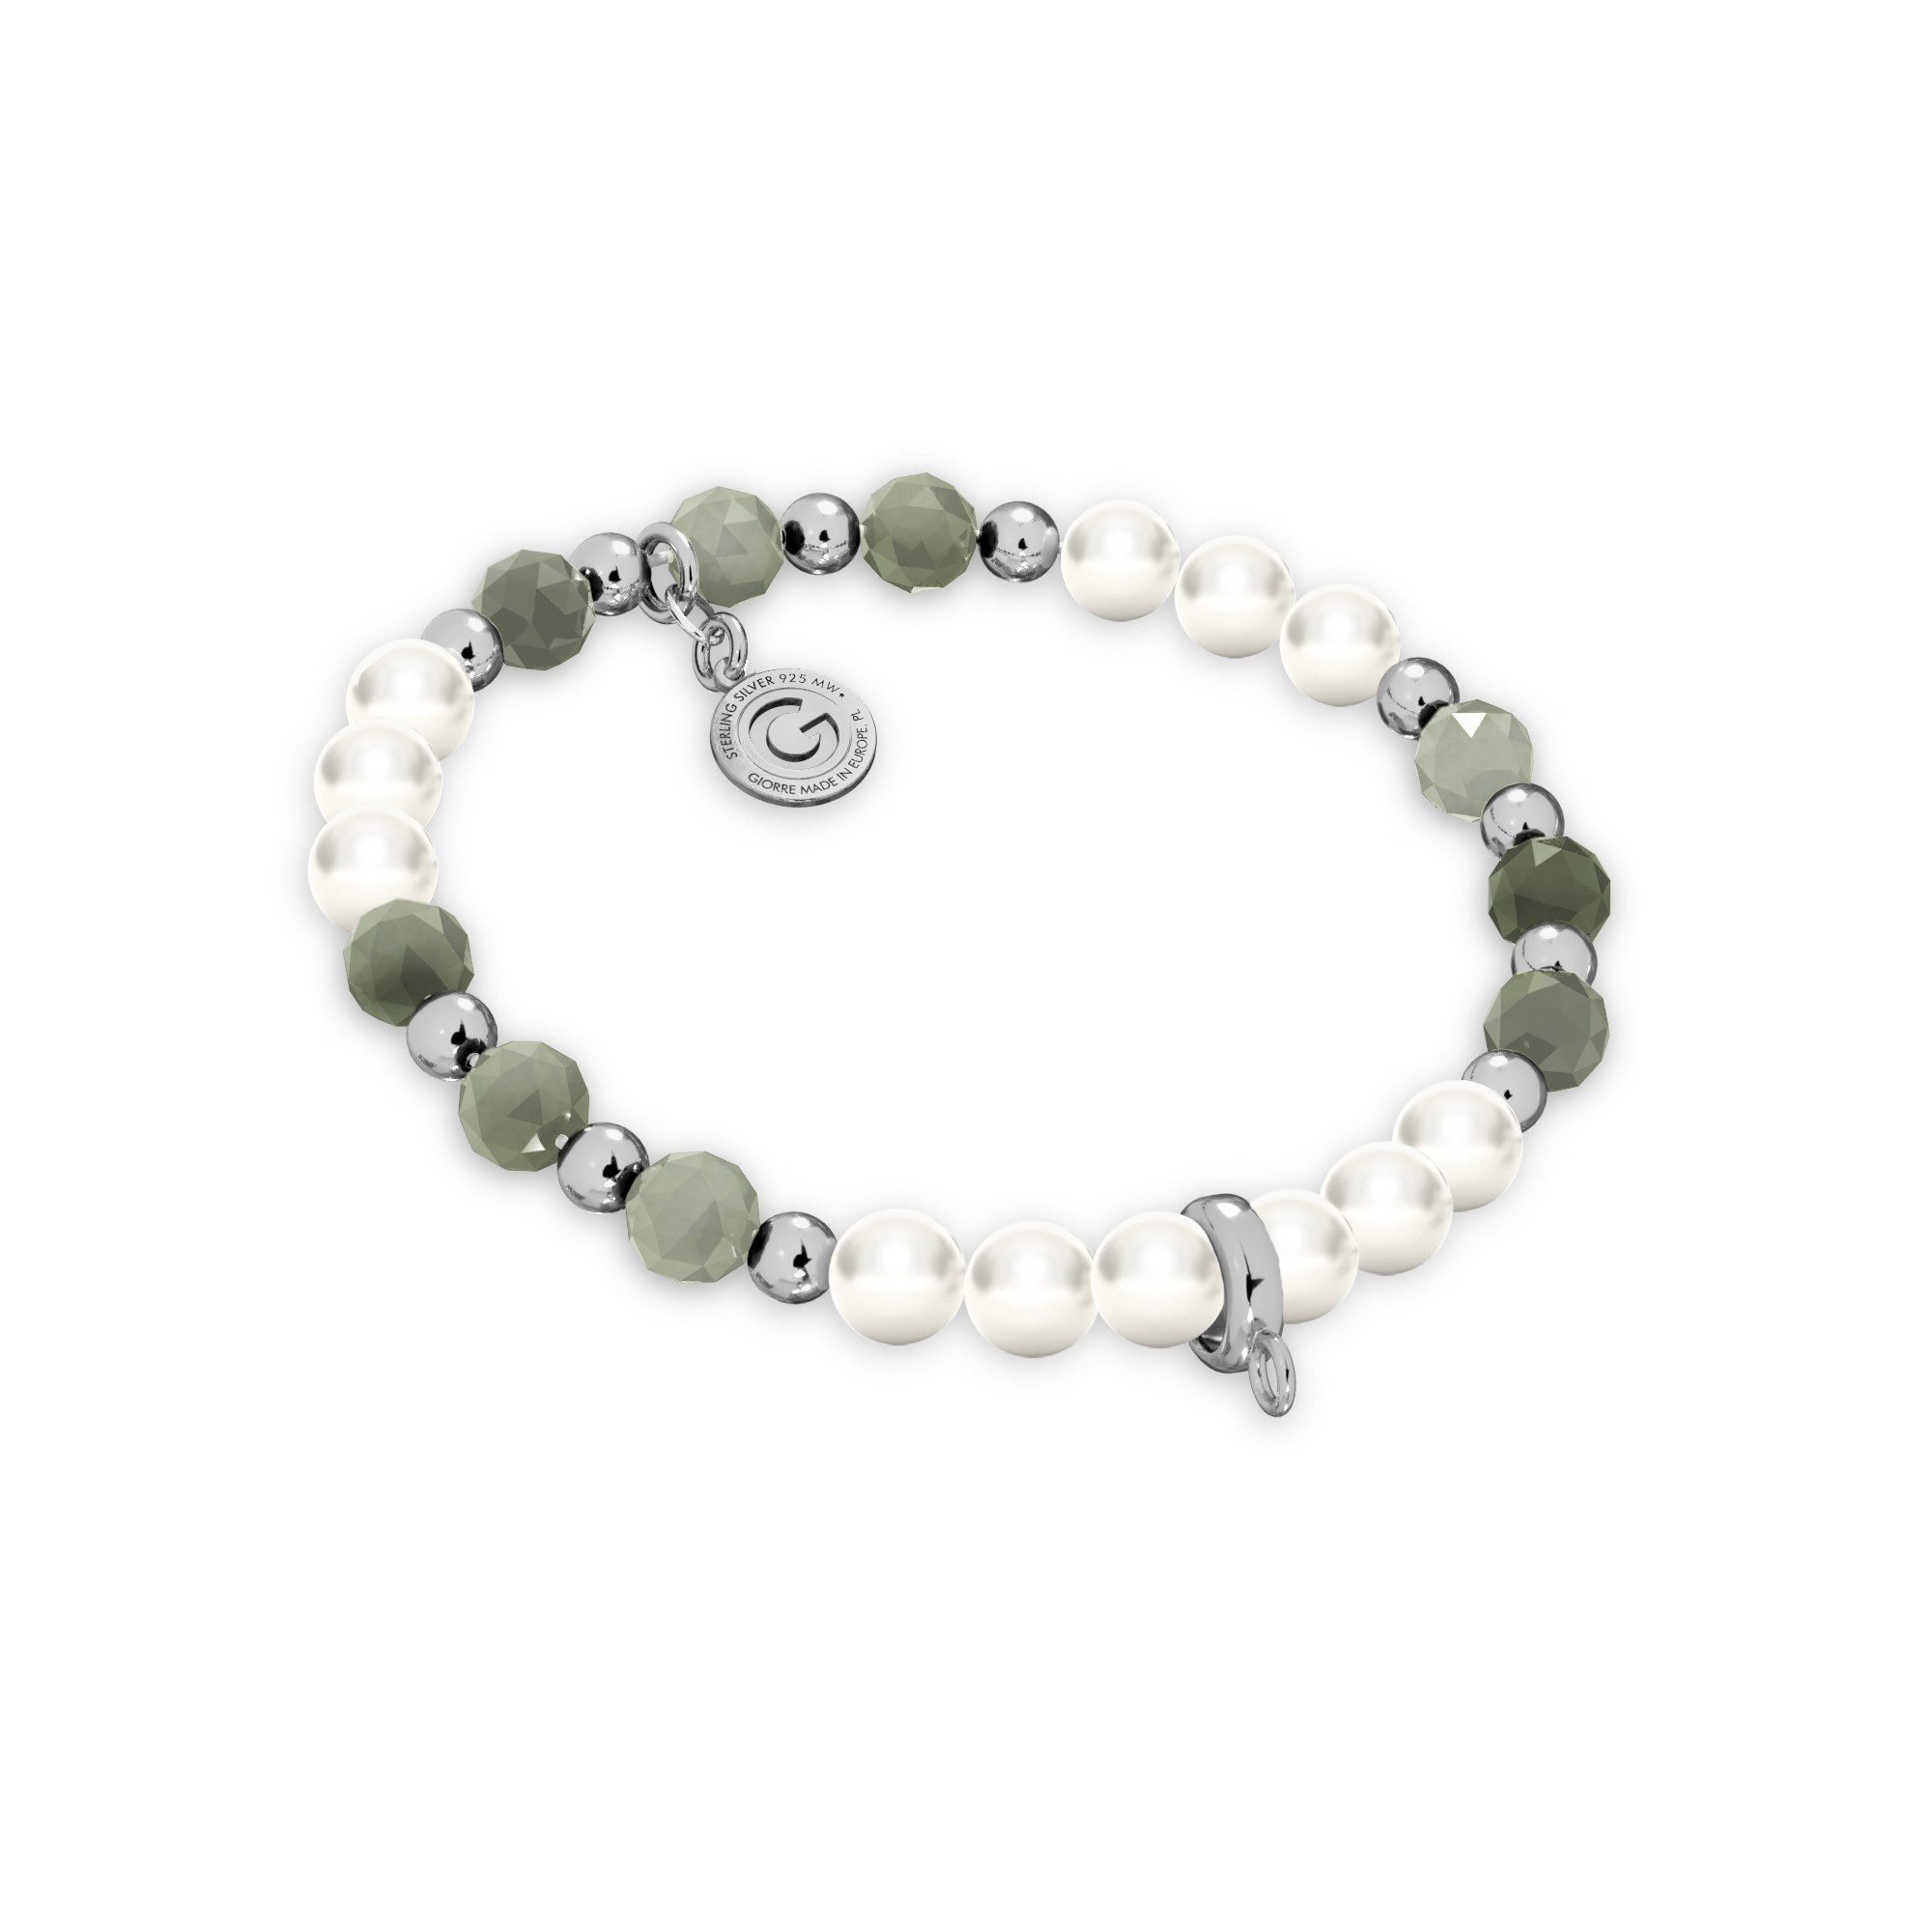 Emerald pearl charms bracelet, sterling silver 925